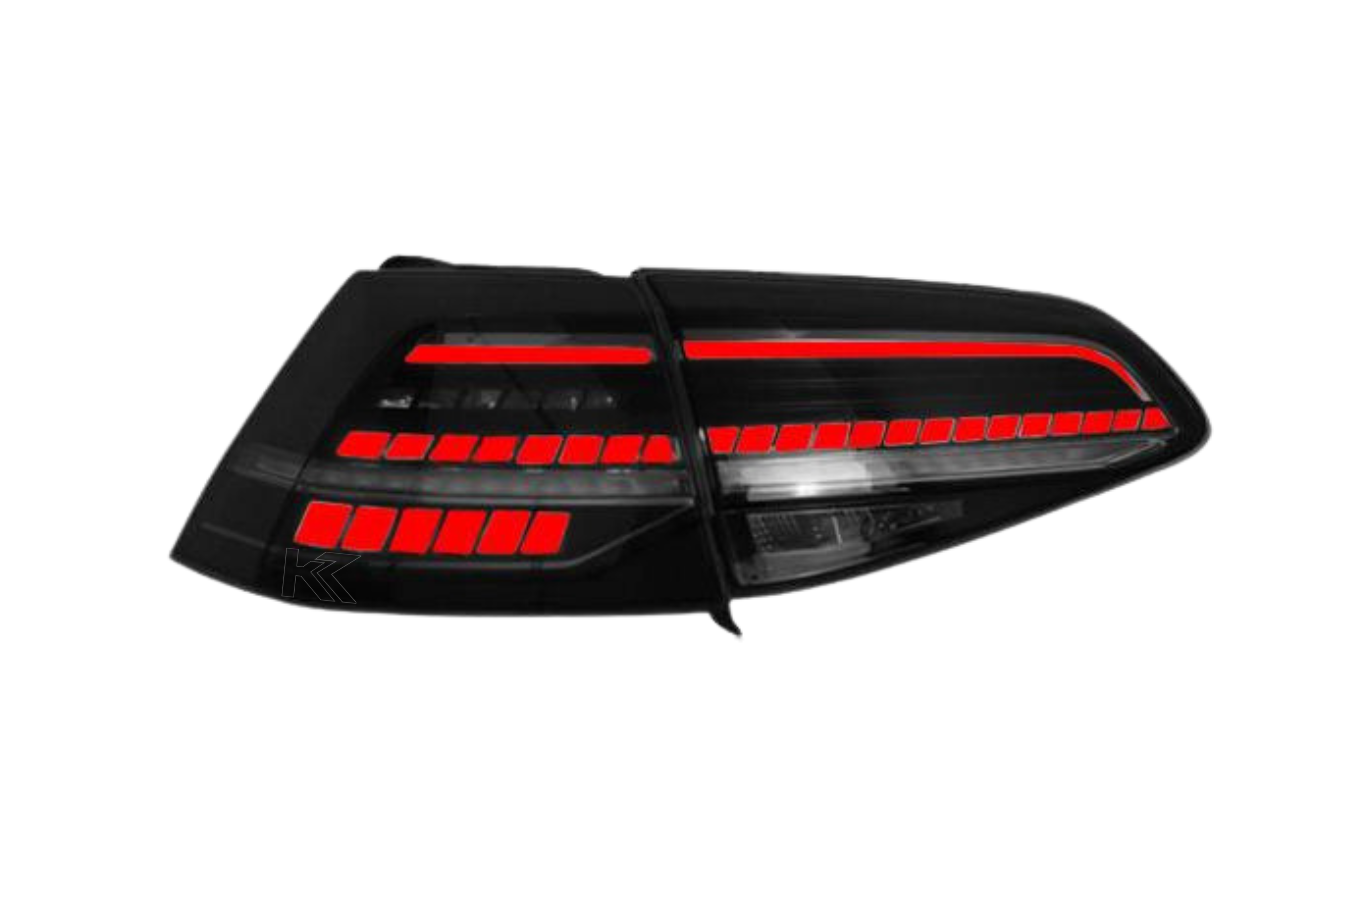 VW MK7 Golf 7 and Golf MK7 7.5 Euro Style Tail Lights 2013-2019